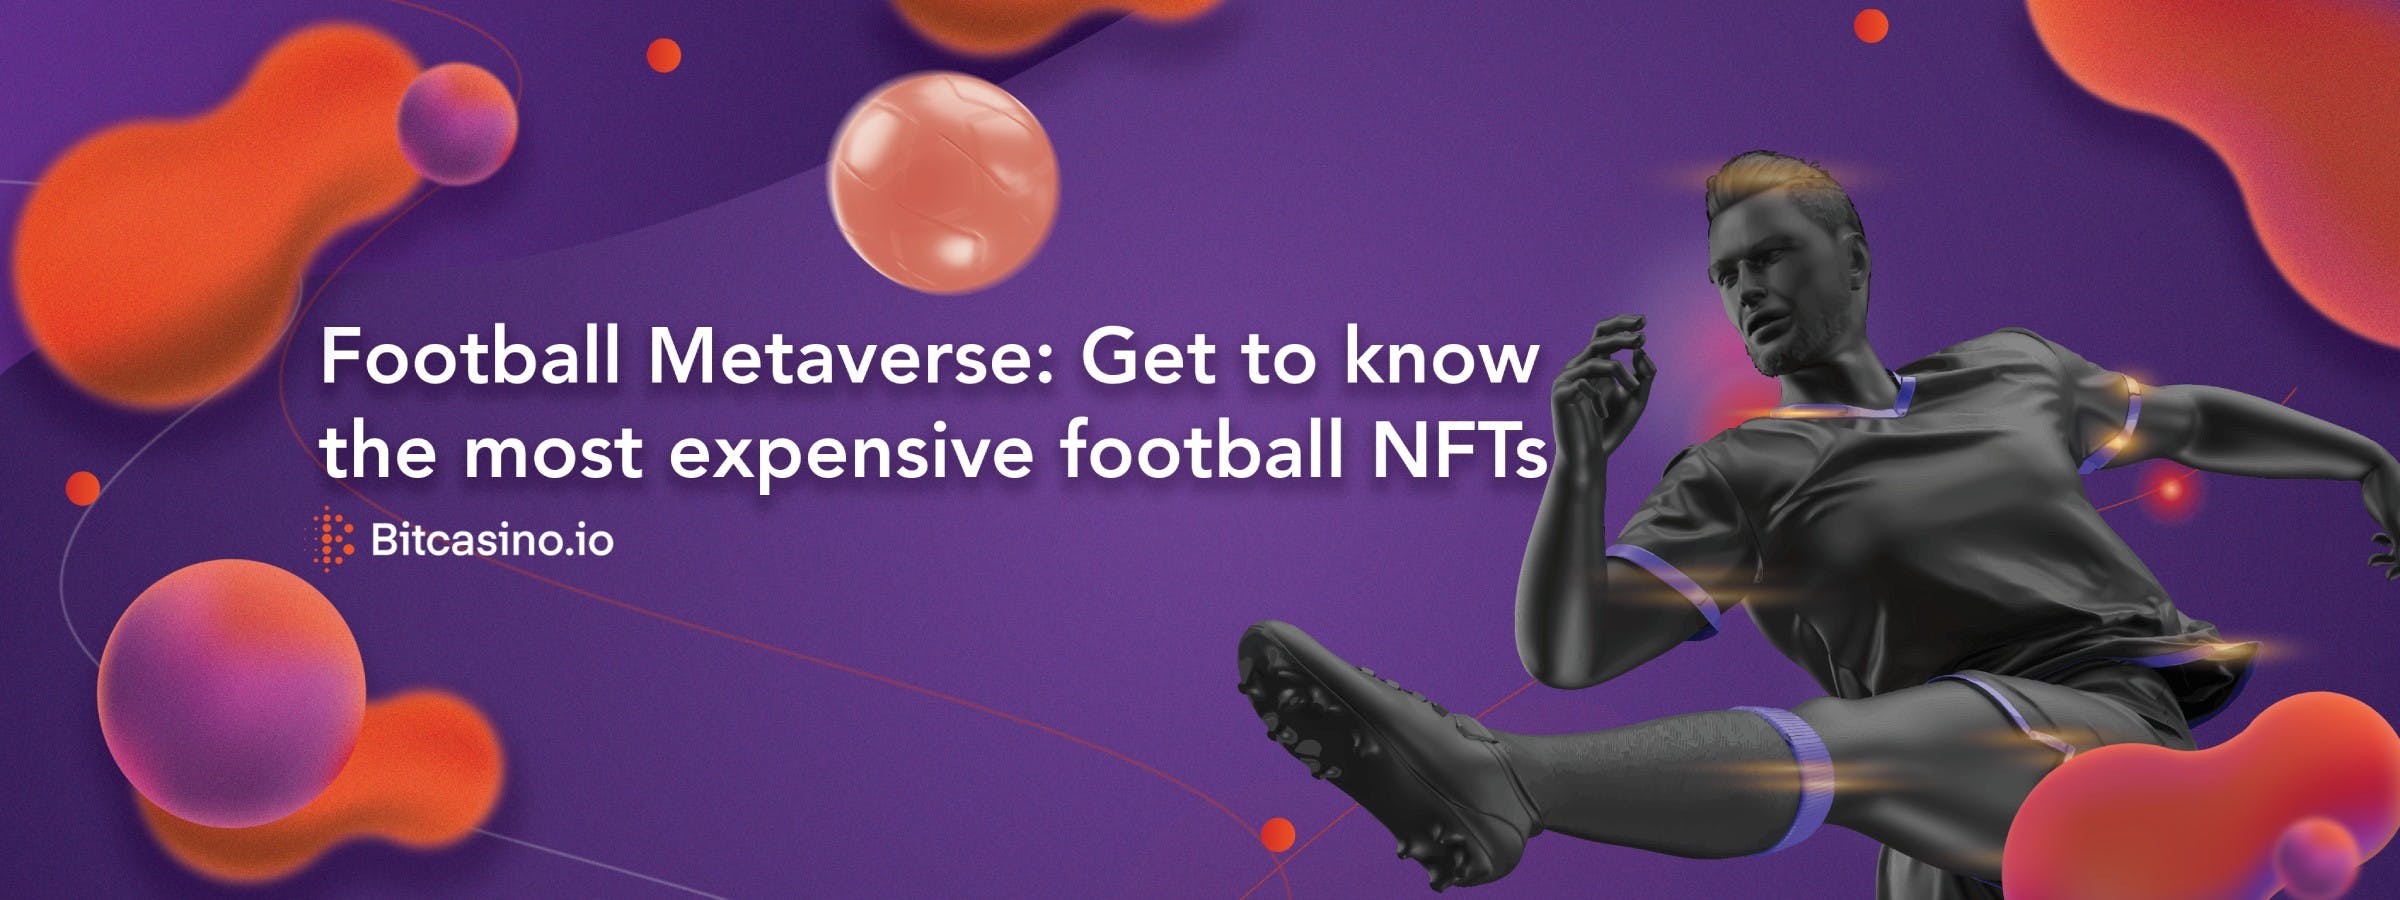 Football Metaverse: Get to know the most expensive football NFTs